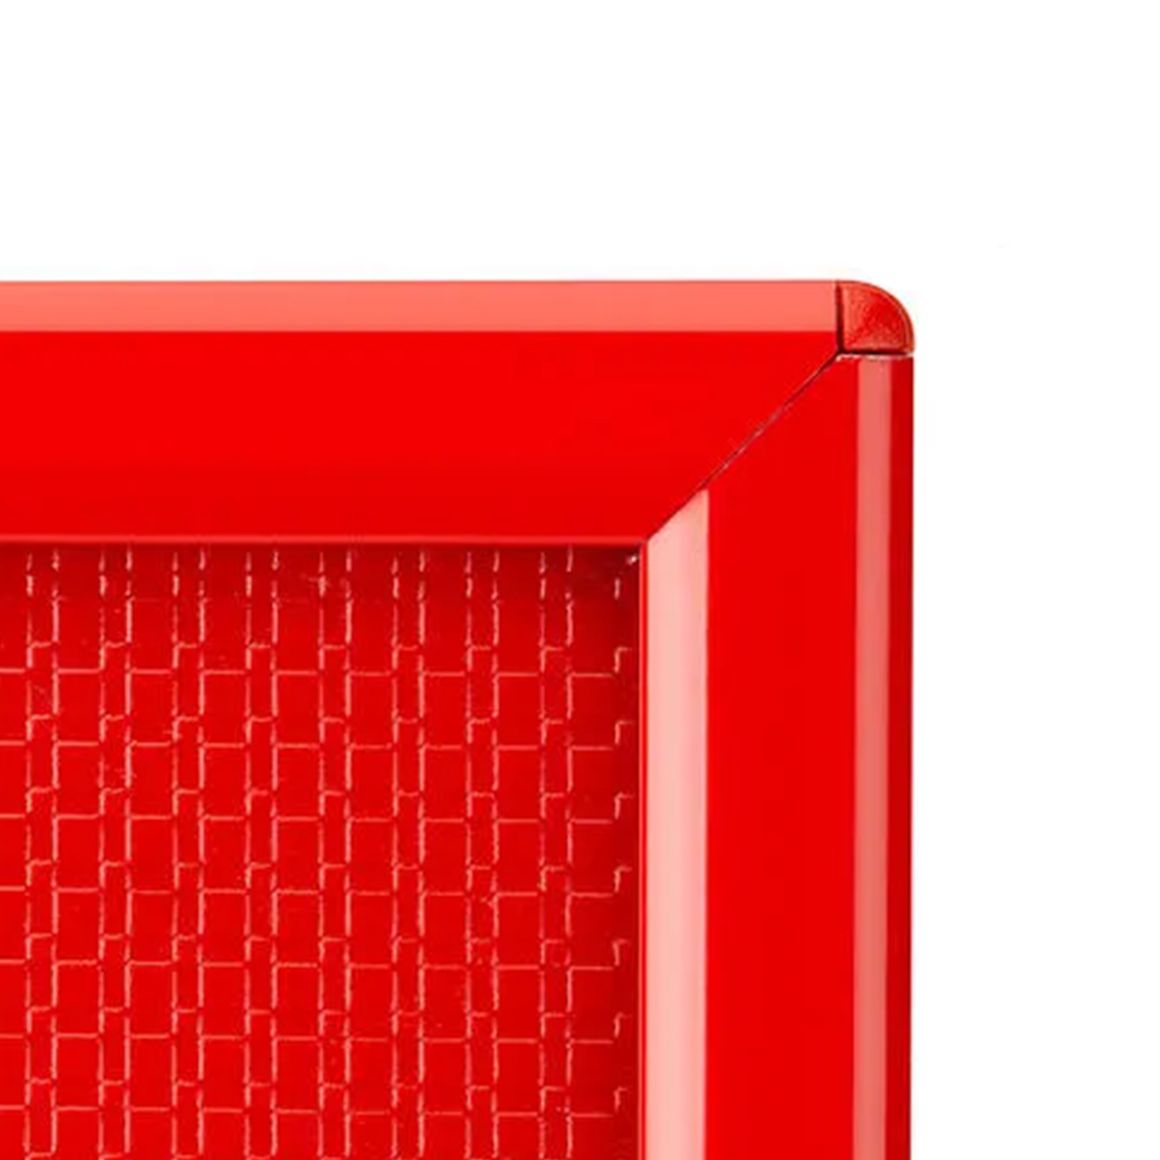 snap-frames-red-powder-coated